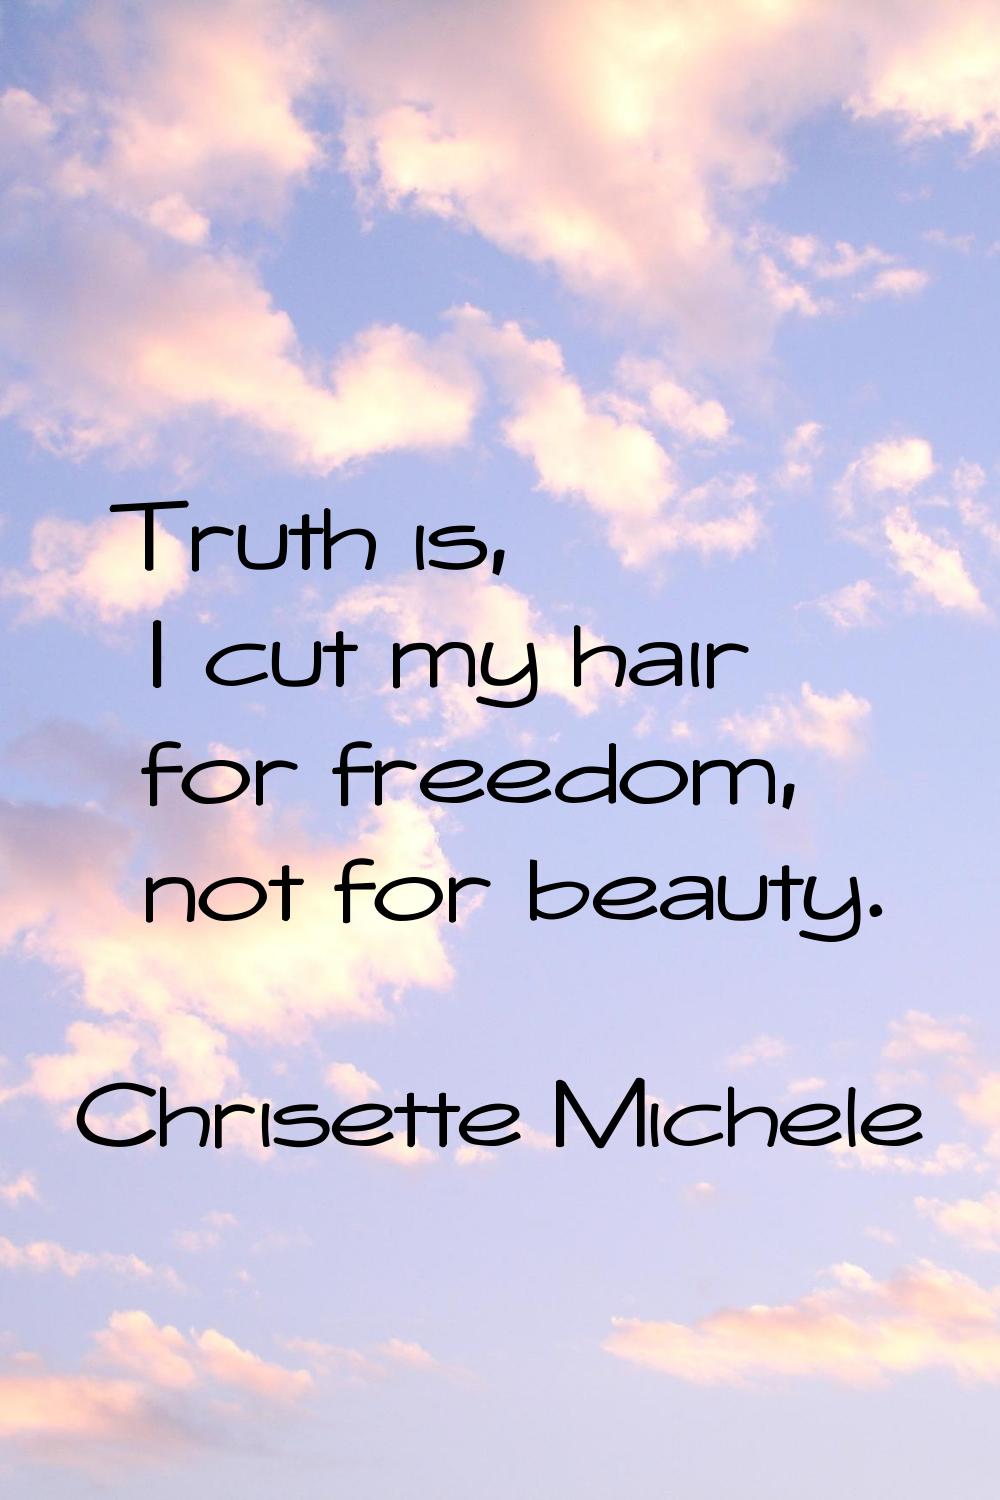 Truth is, I cut my hair for freedom, not for beauty.